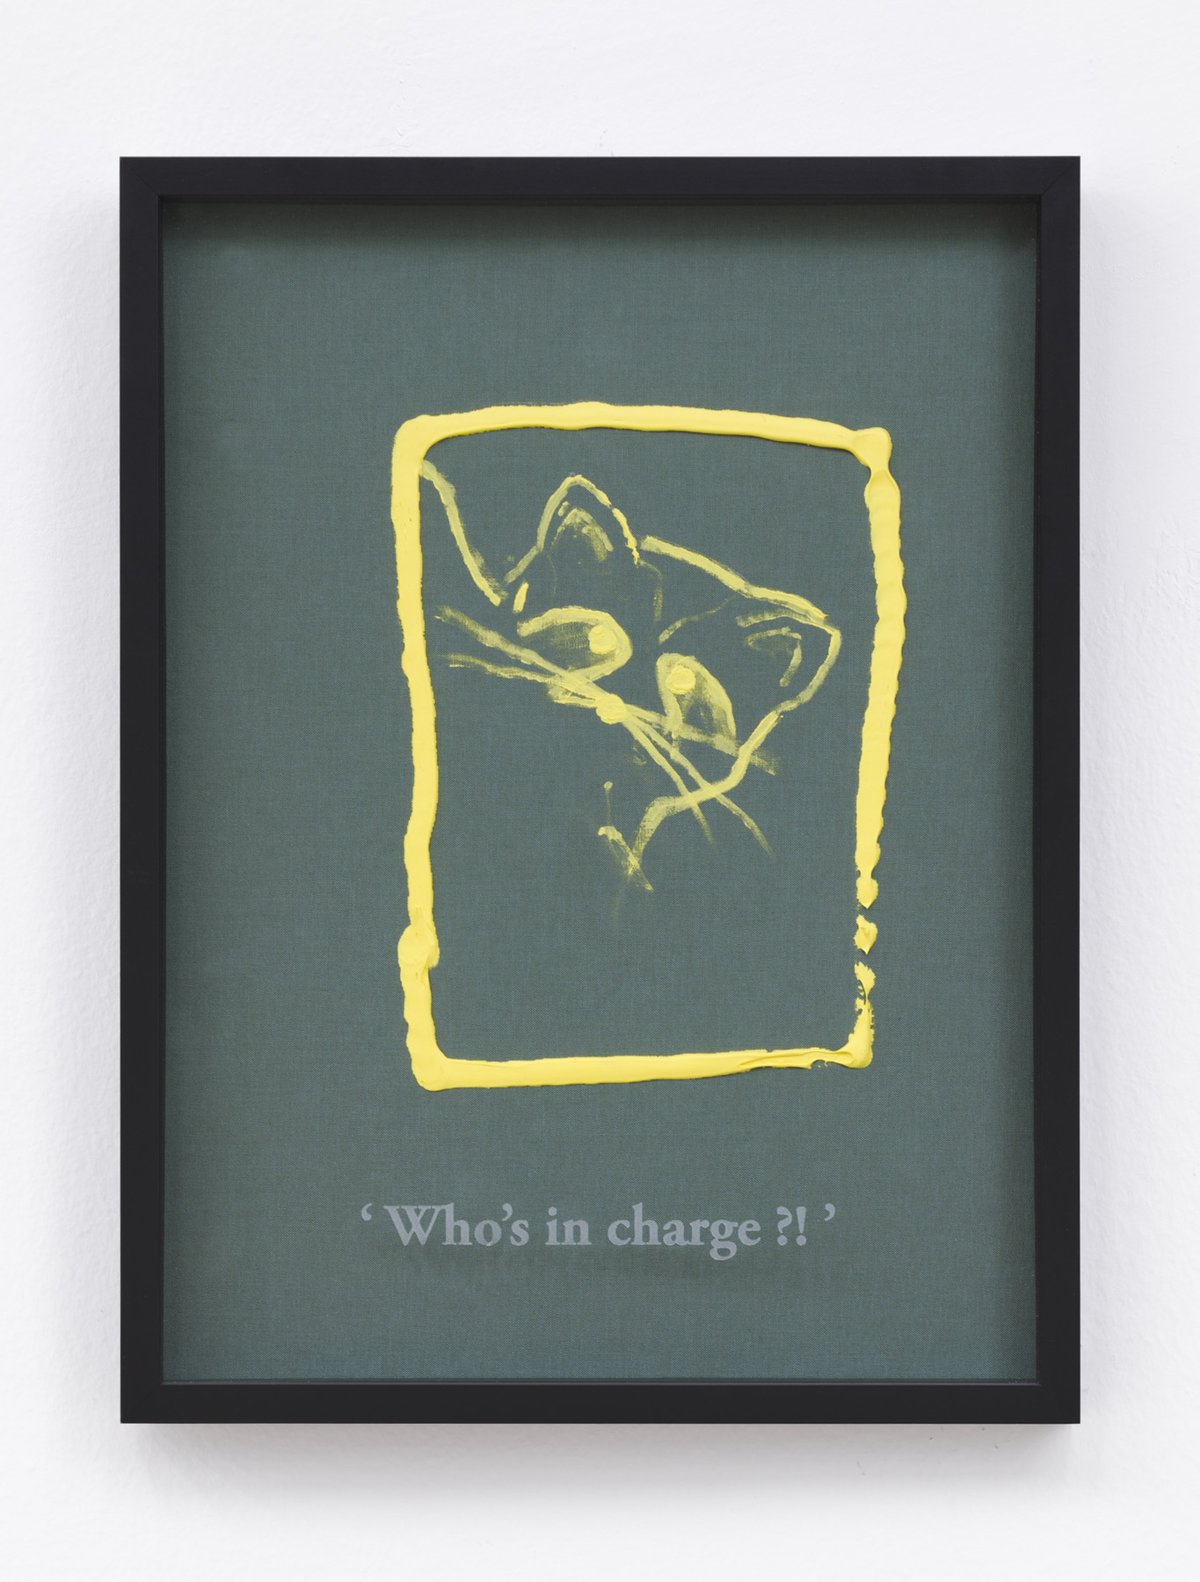 Philipp Timischl&quot;Who&#x27;s in charge?!&quot; (Green/Brilliant Yellow Light), 2017Acrylic on linen and glass-engraved object frame40.1 x 32.1 cm